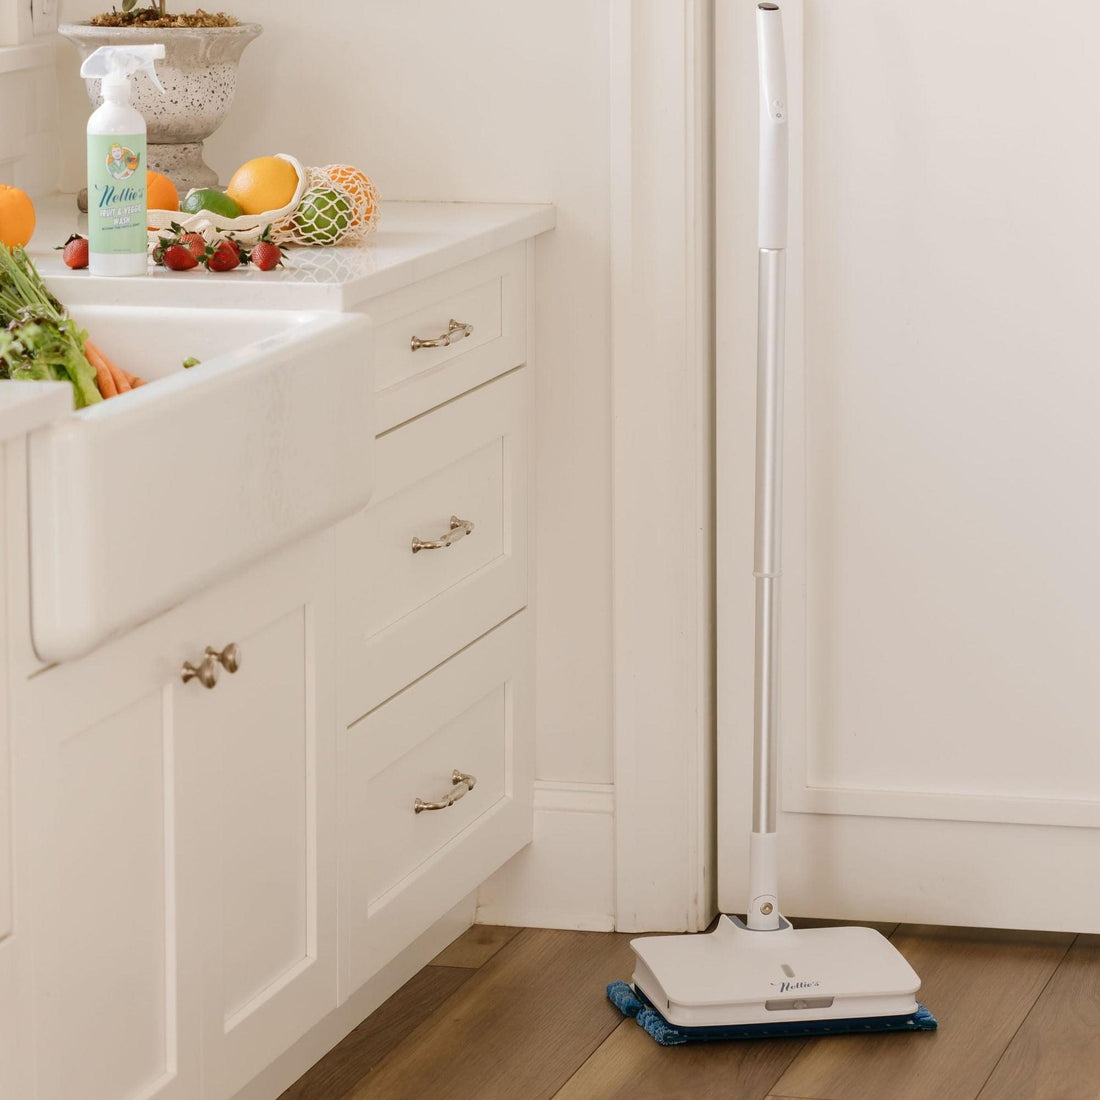 Fruit and vegetable wash and fruit on counter with electric mop on floor